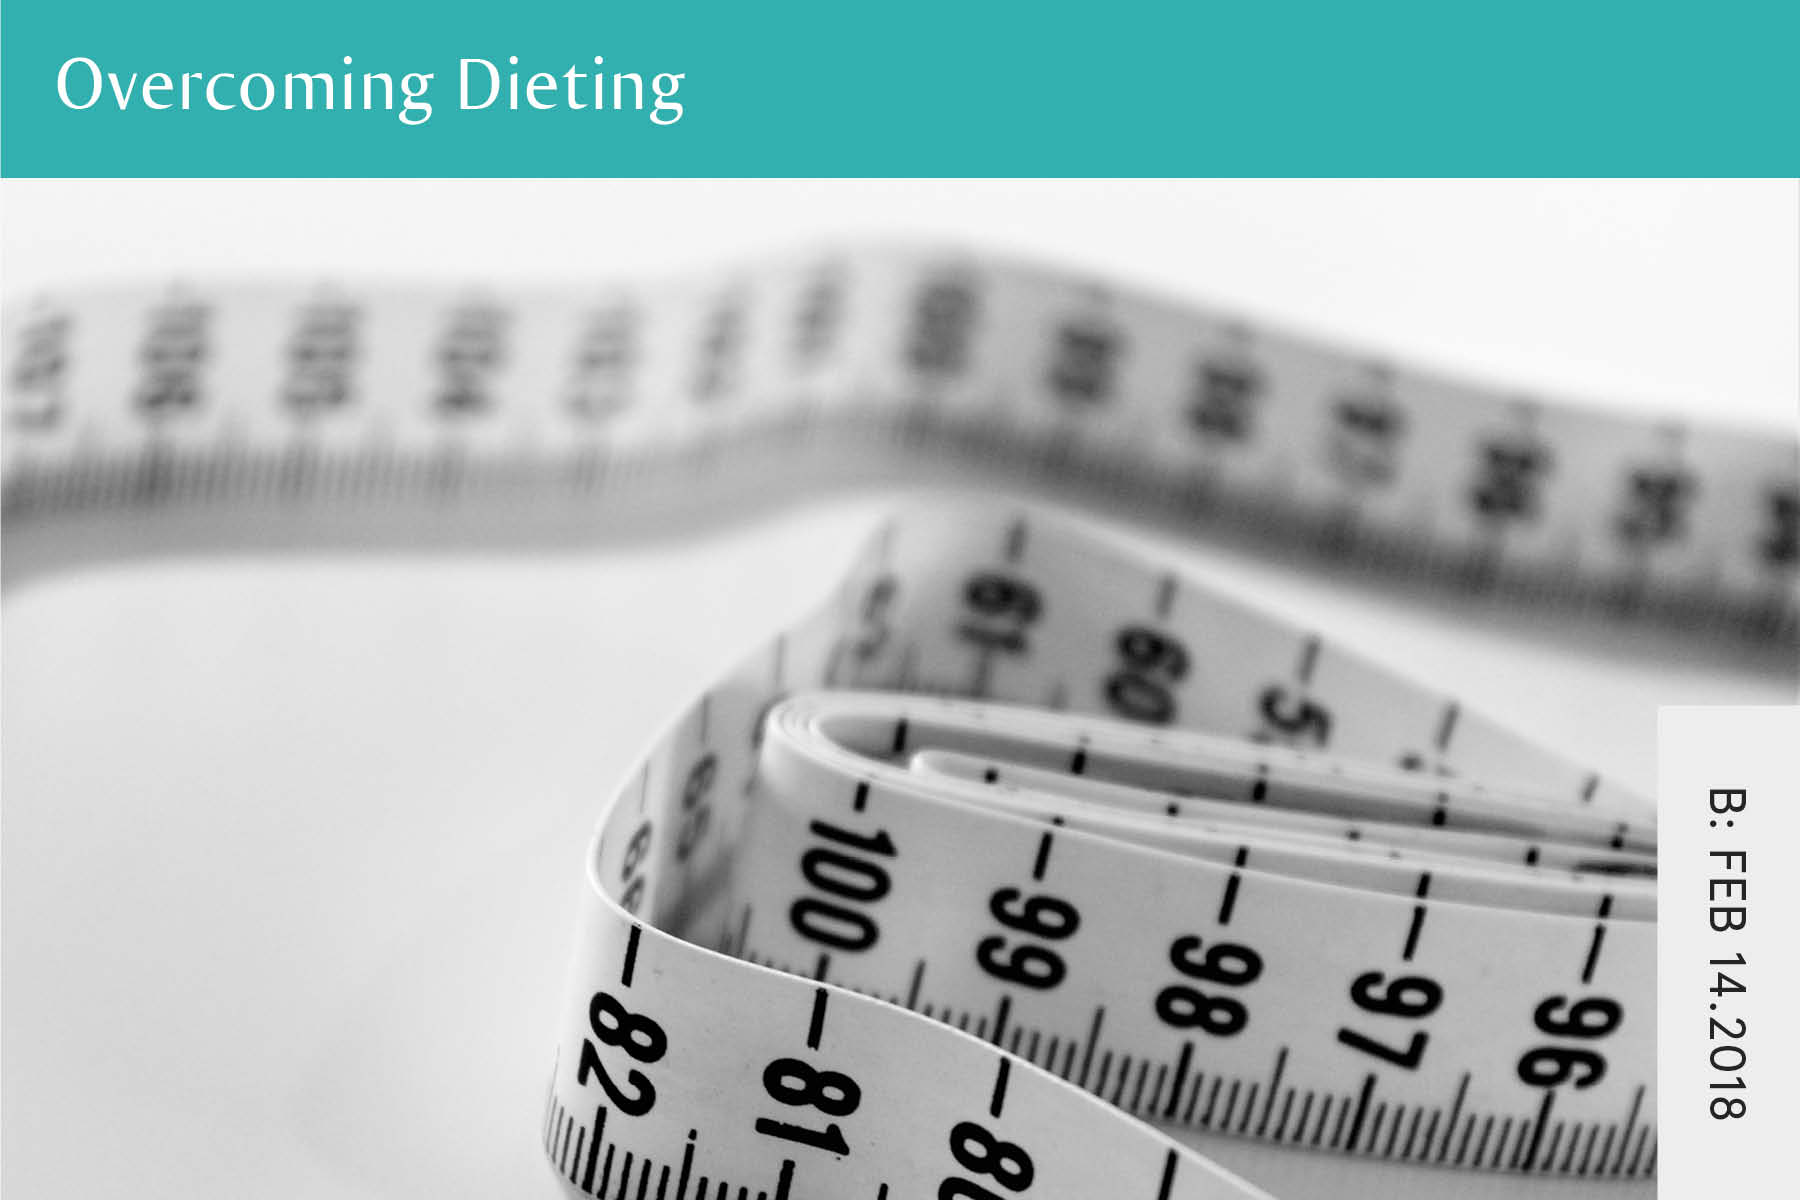 Overcoming Dieting - Seven Health: Eating Disorder Recovery and Anti Diet Nutritionist